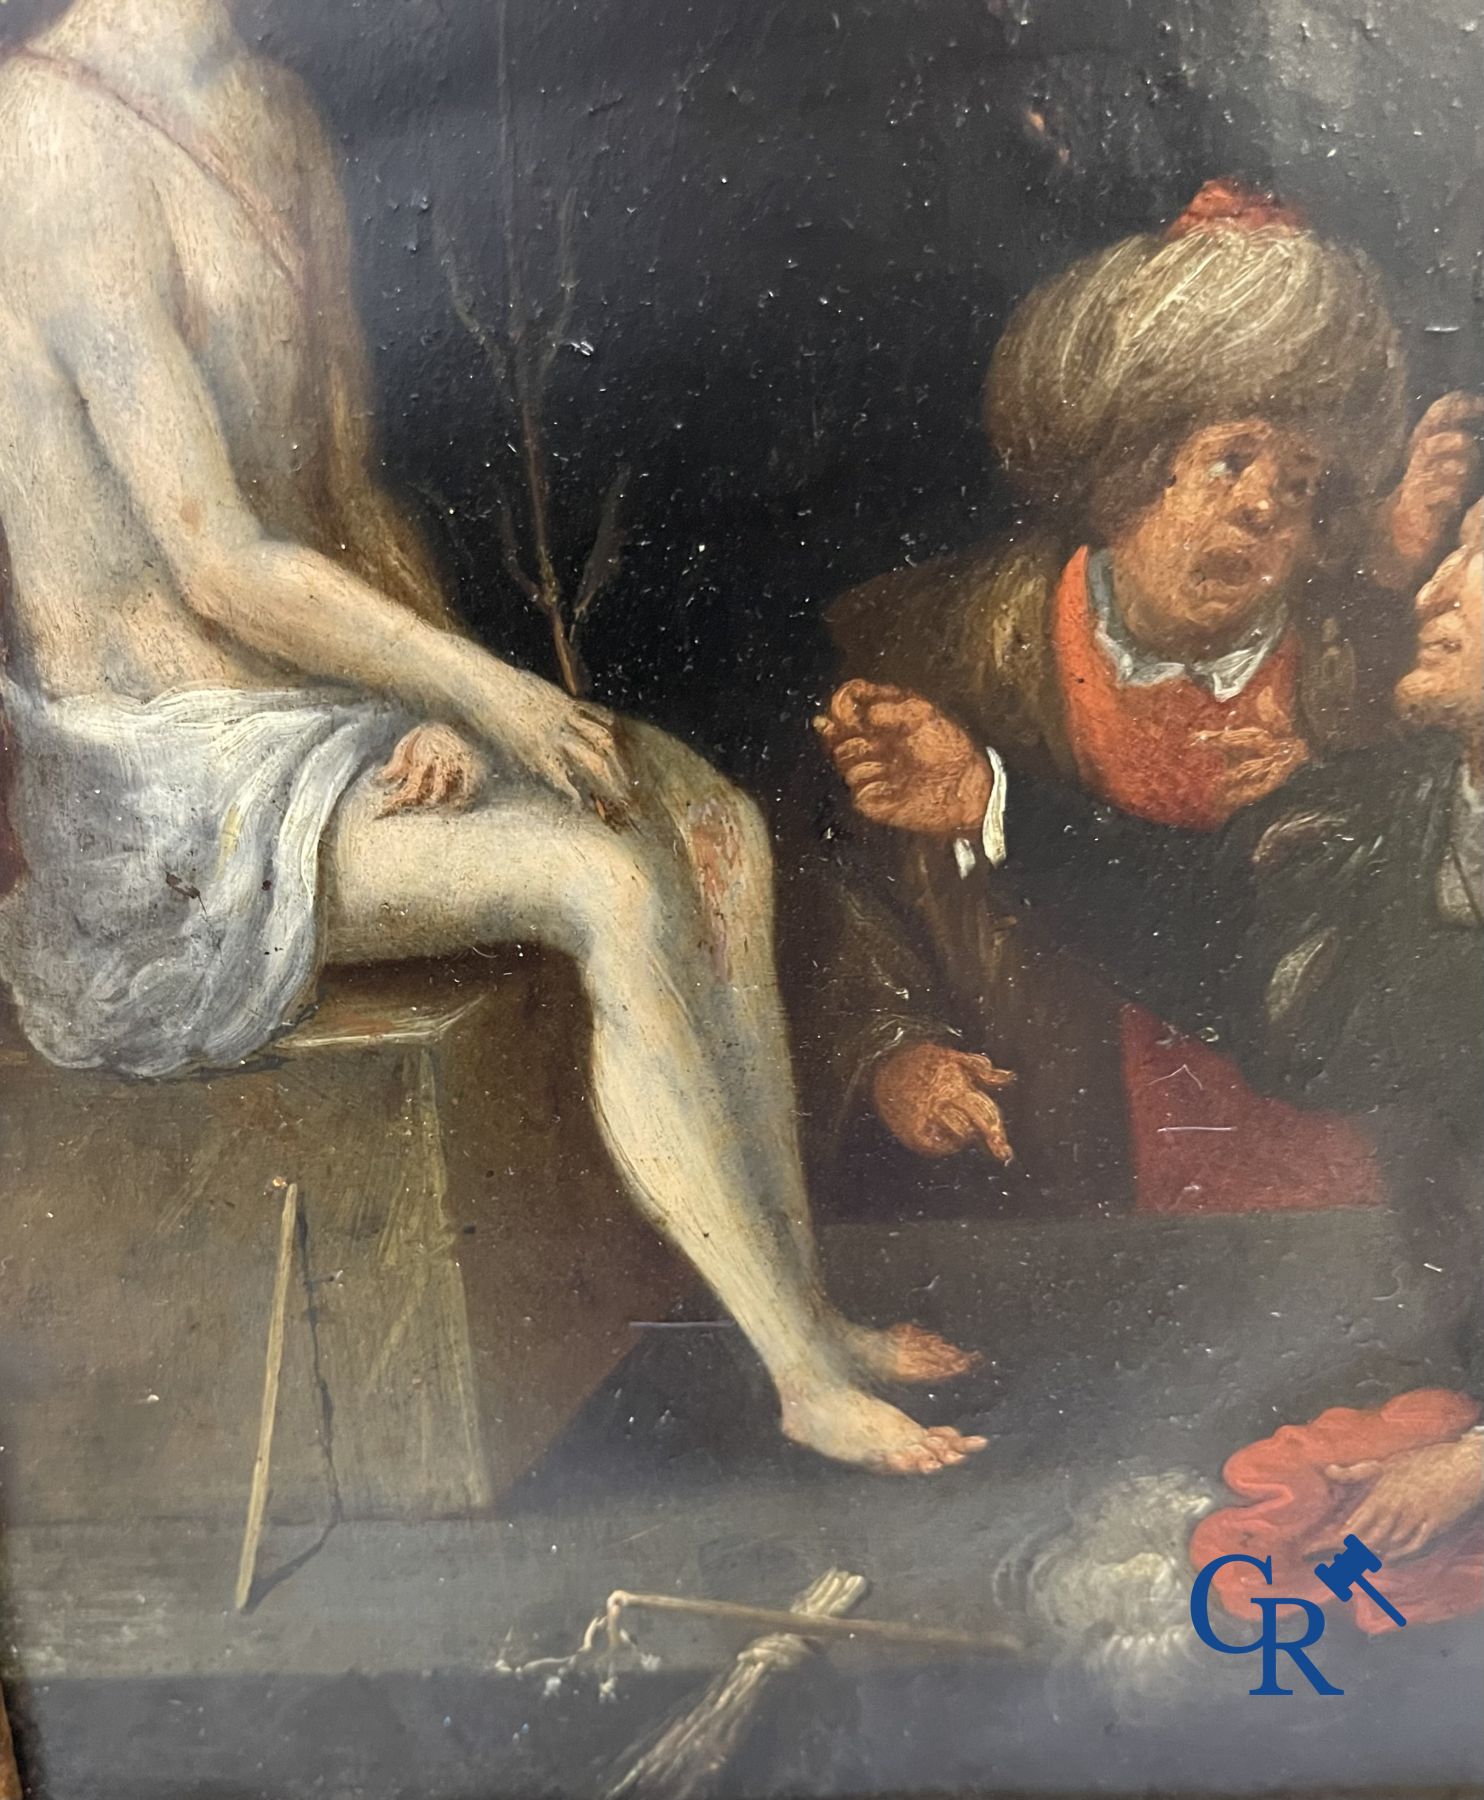 Painting: Antwerp, 16th century. The mockery of Christ. - Image 5 of 11